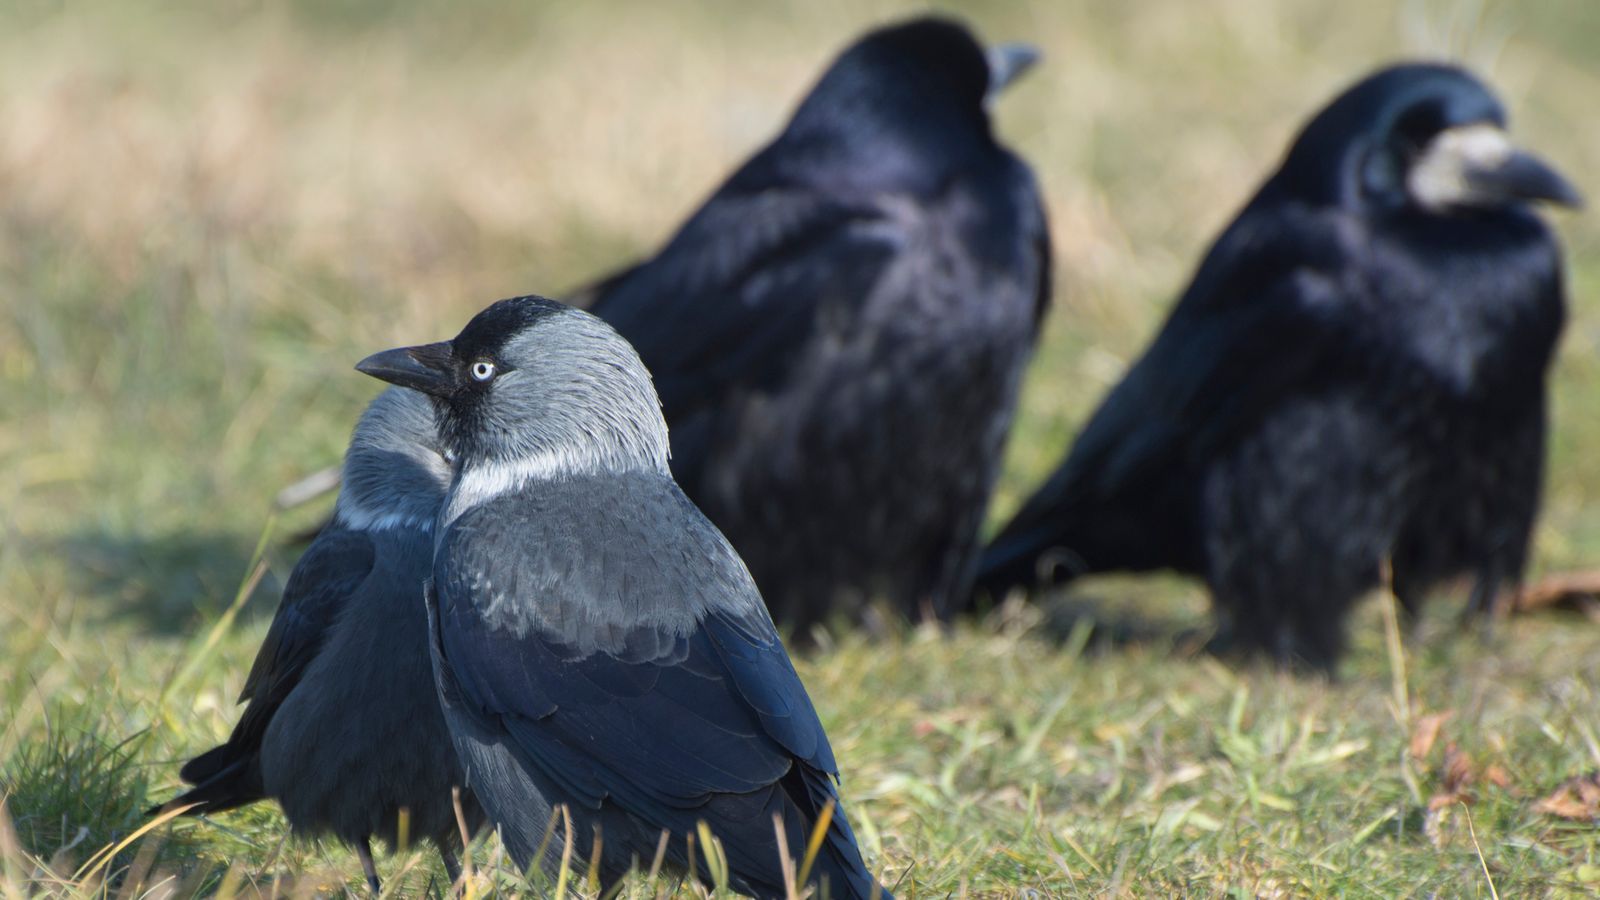 Noisy jackdaws 'cast a vote' by calling to each other before taking off in their thousands, study shows